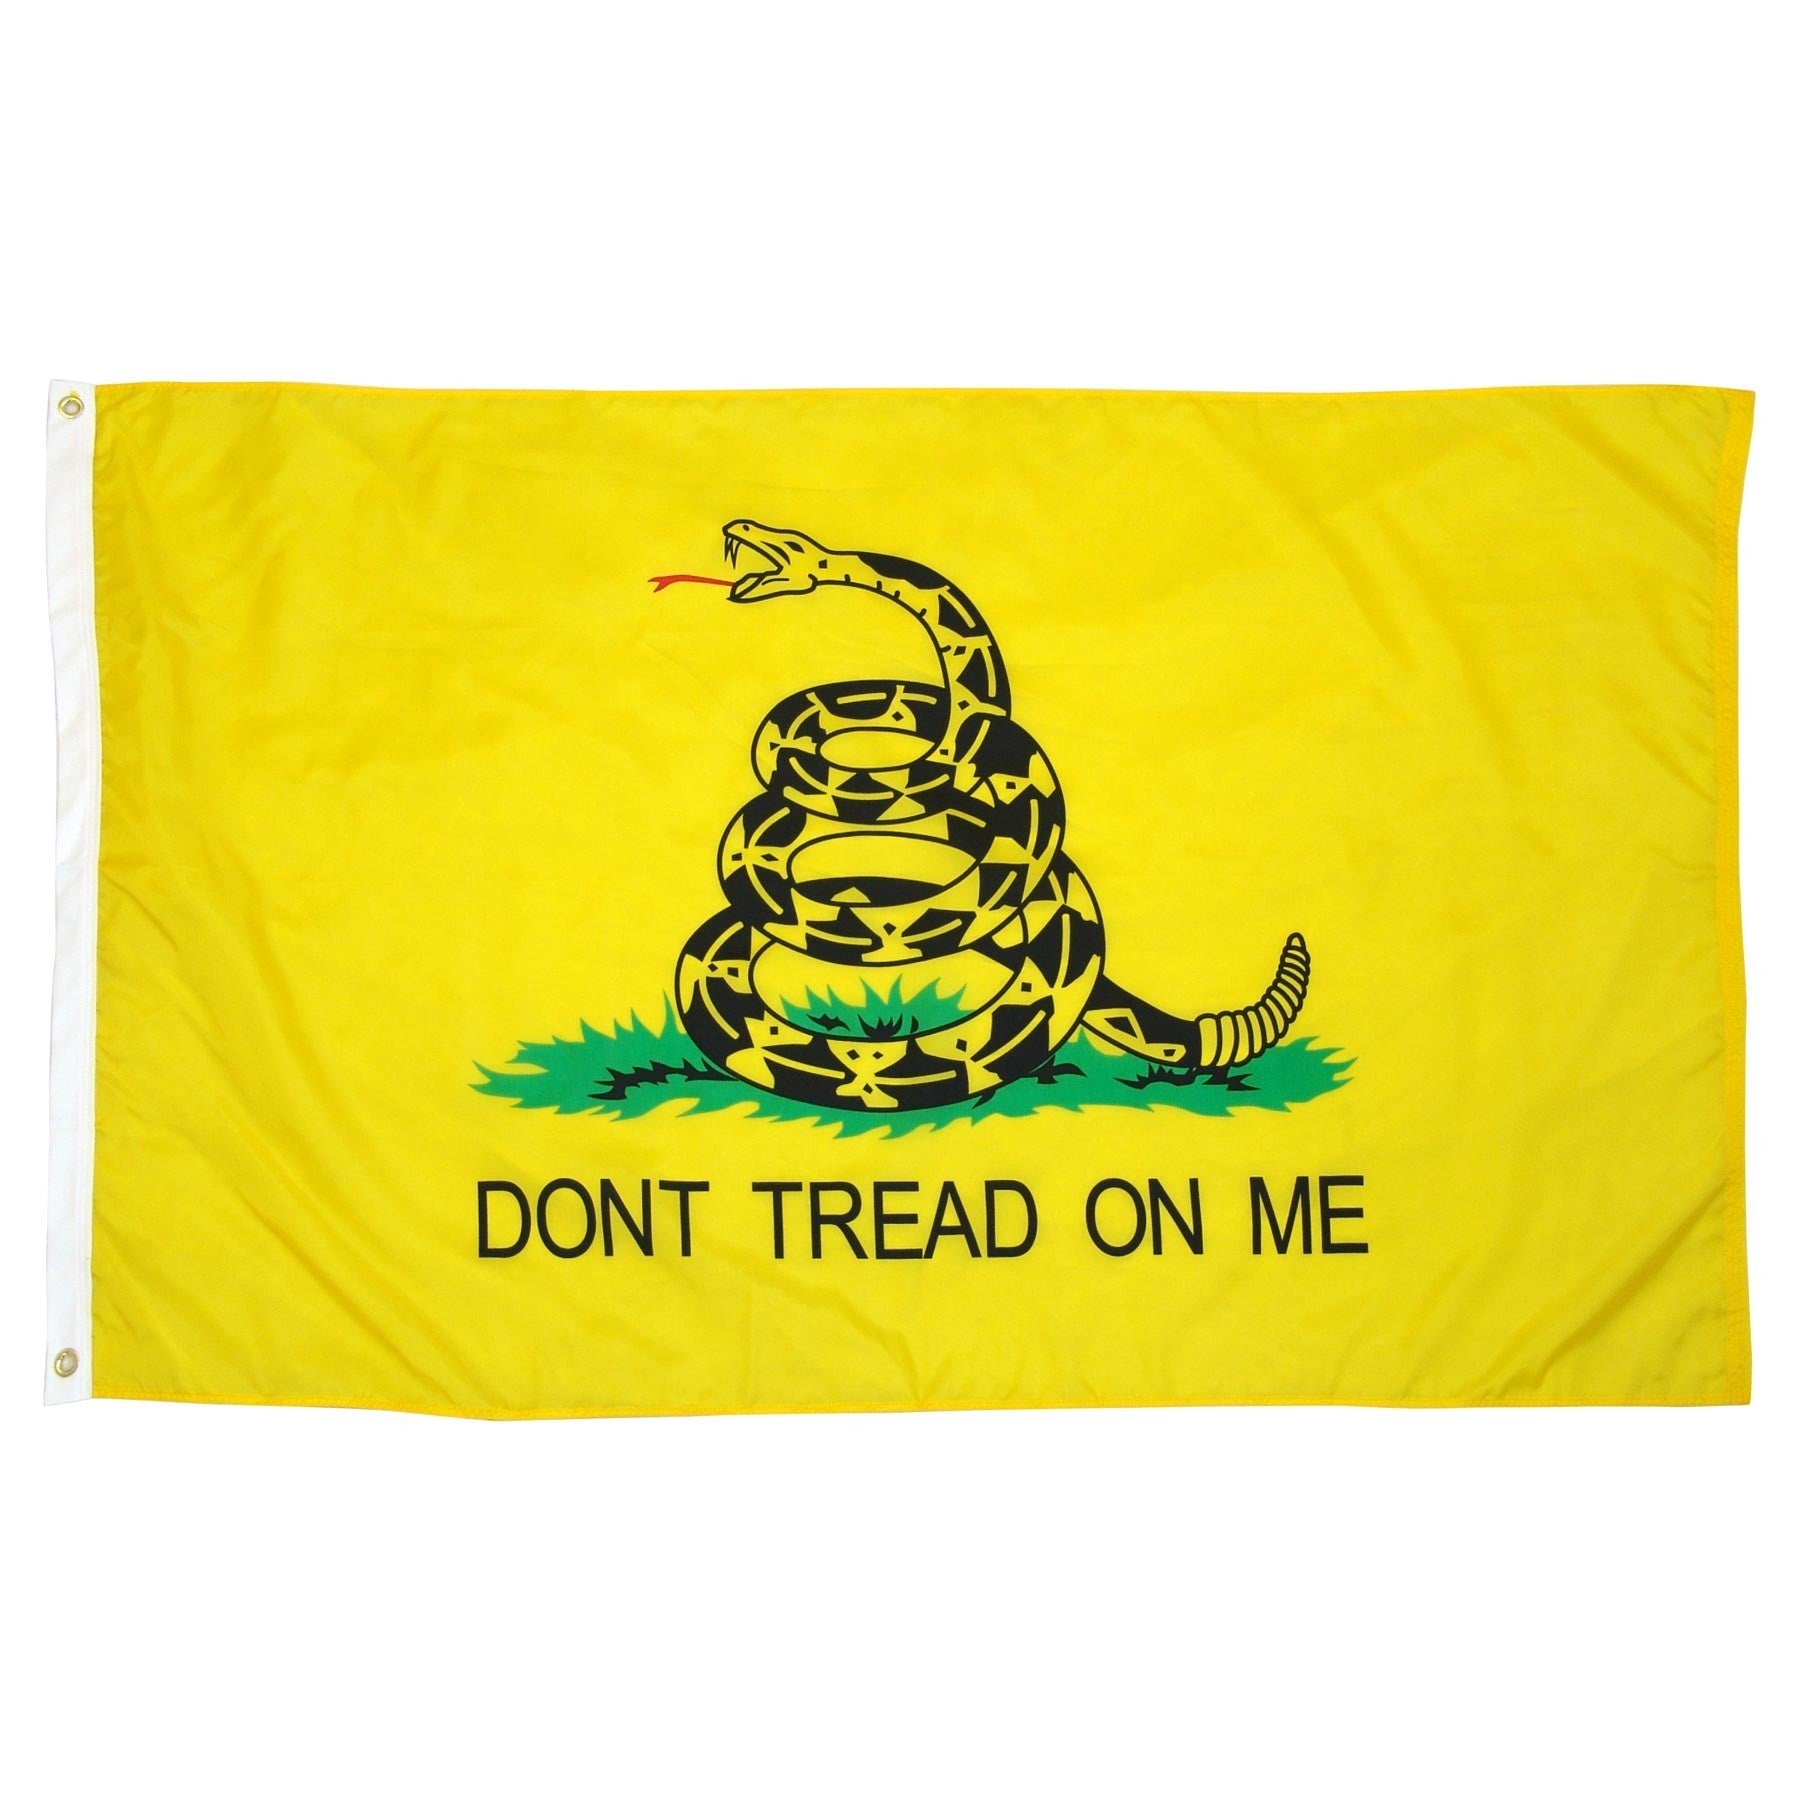 Gadsden "Don't Treat on Me" 3' x 5' High Quality Outdoor Nylon Flags